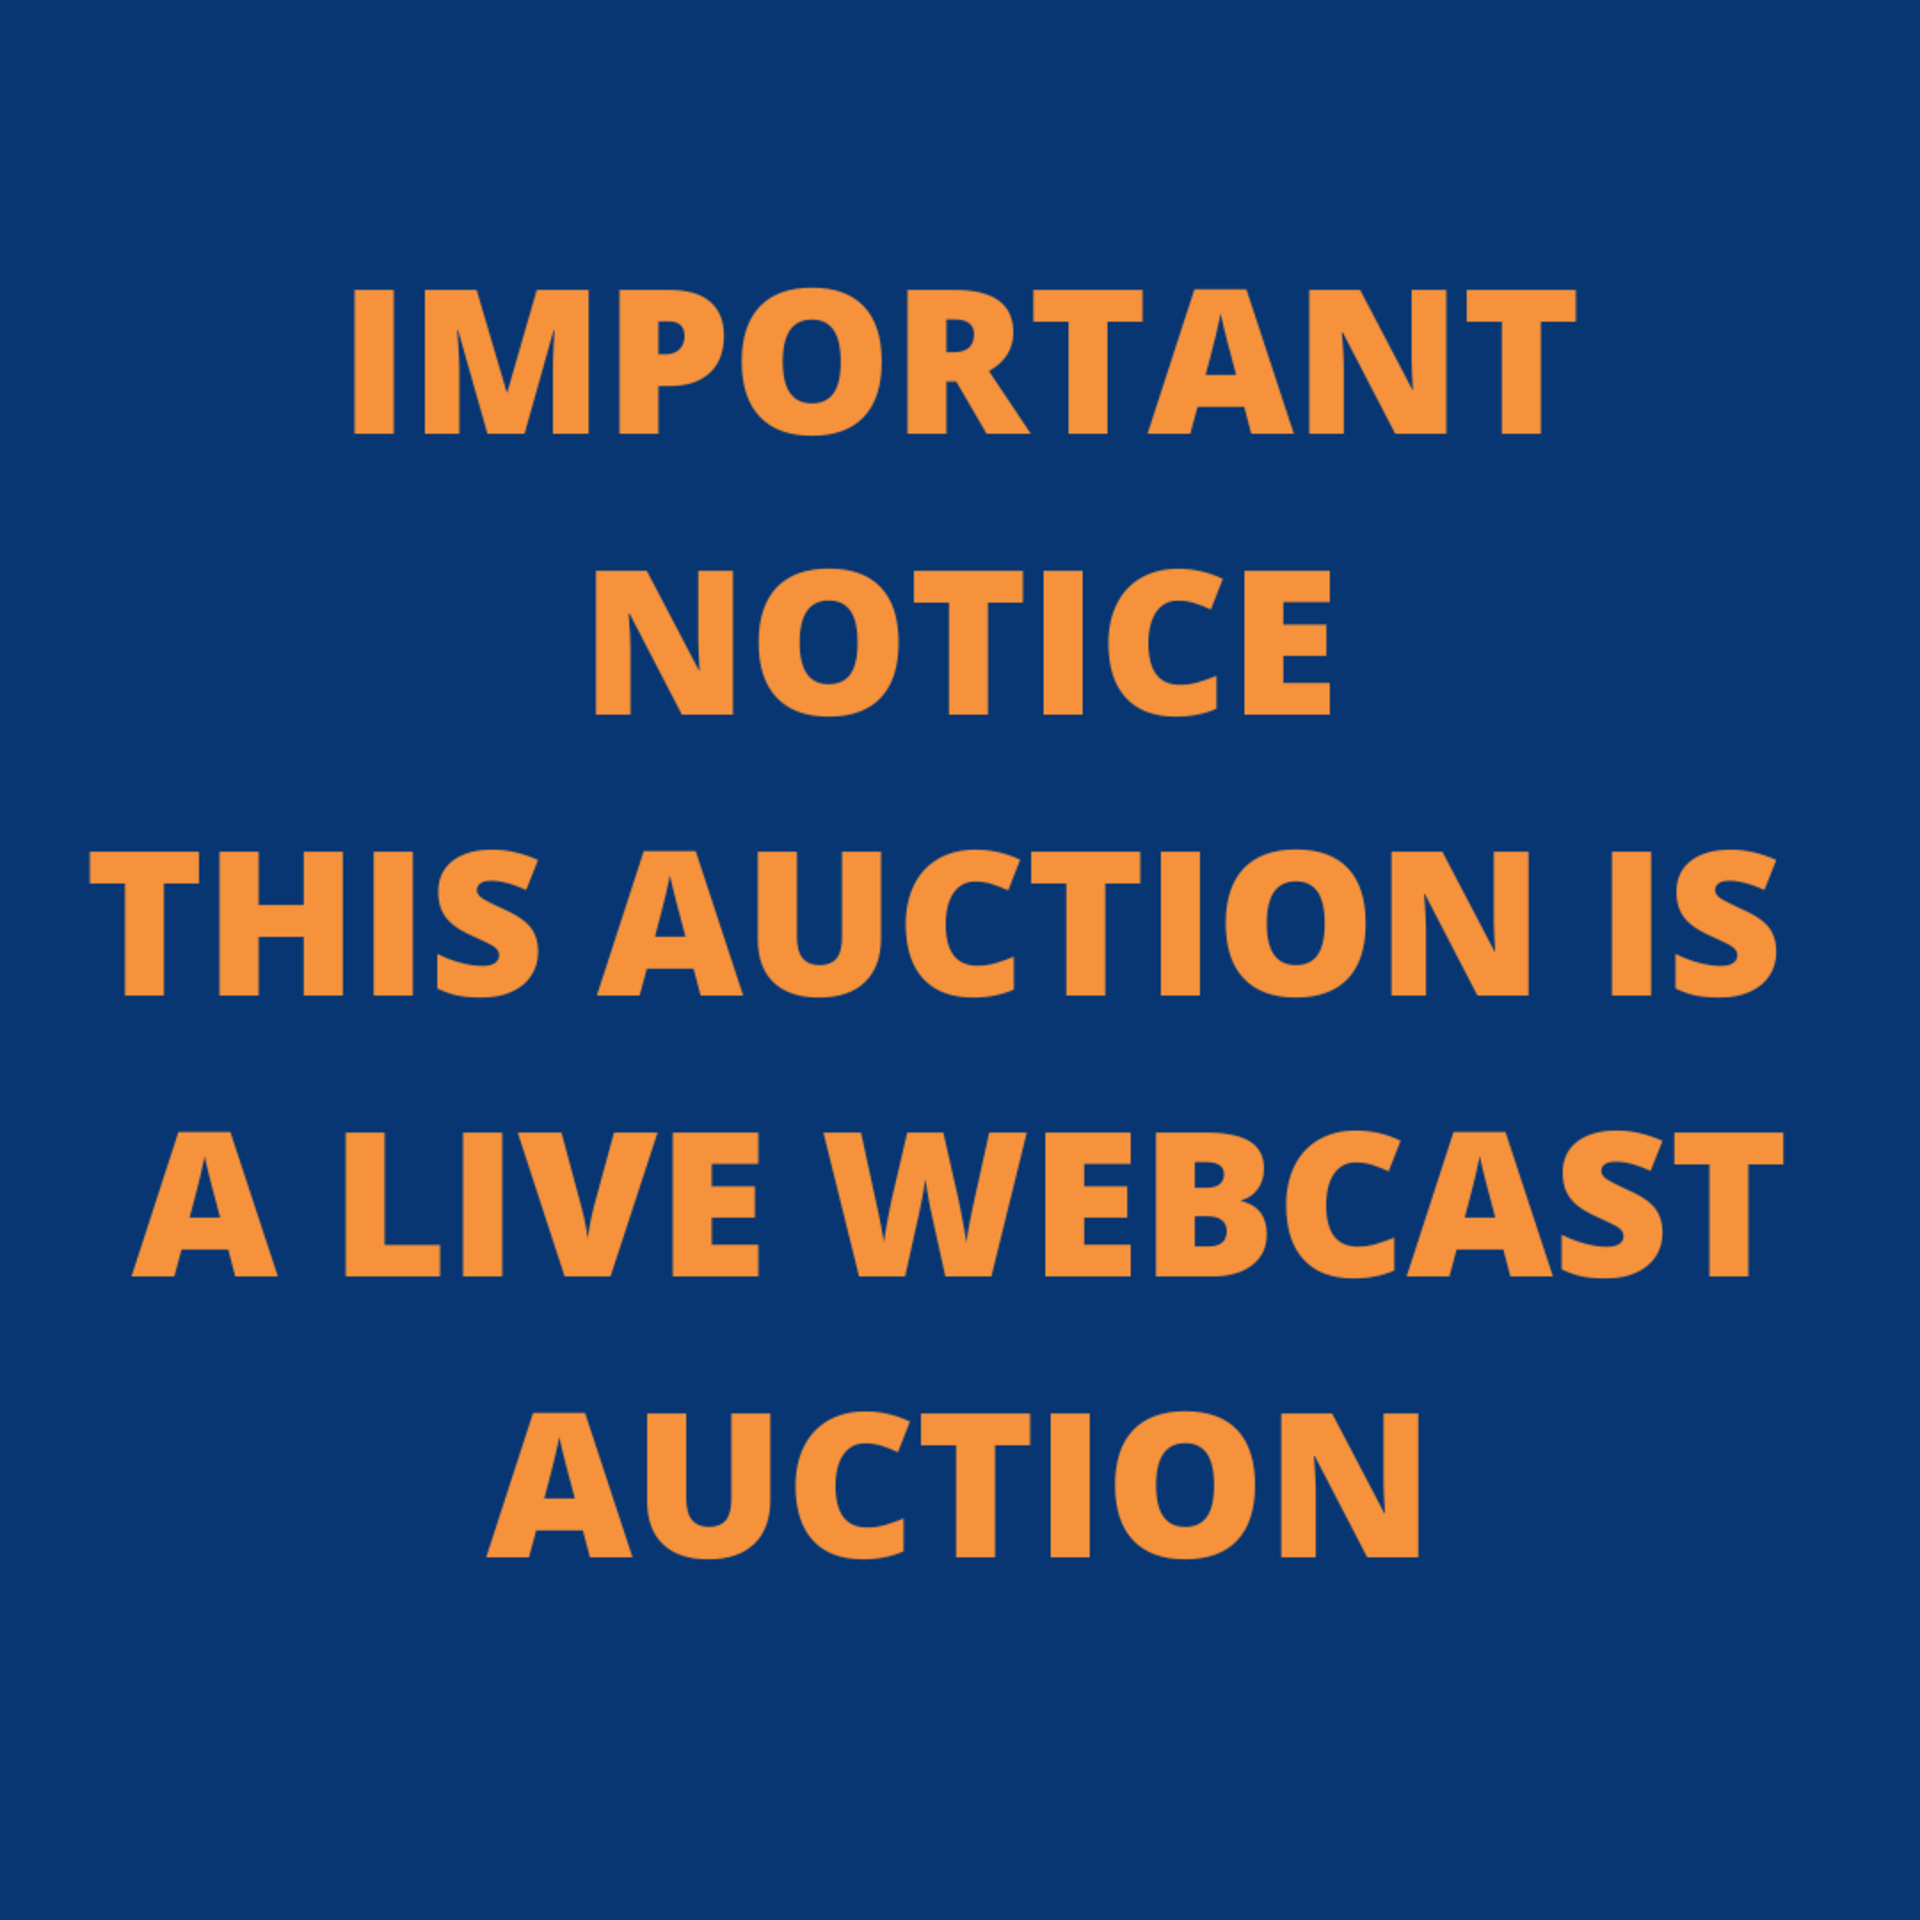 IMPORTANT NOTICE - THIS IS A LIVE WEBCAST AUCTION